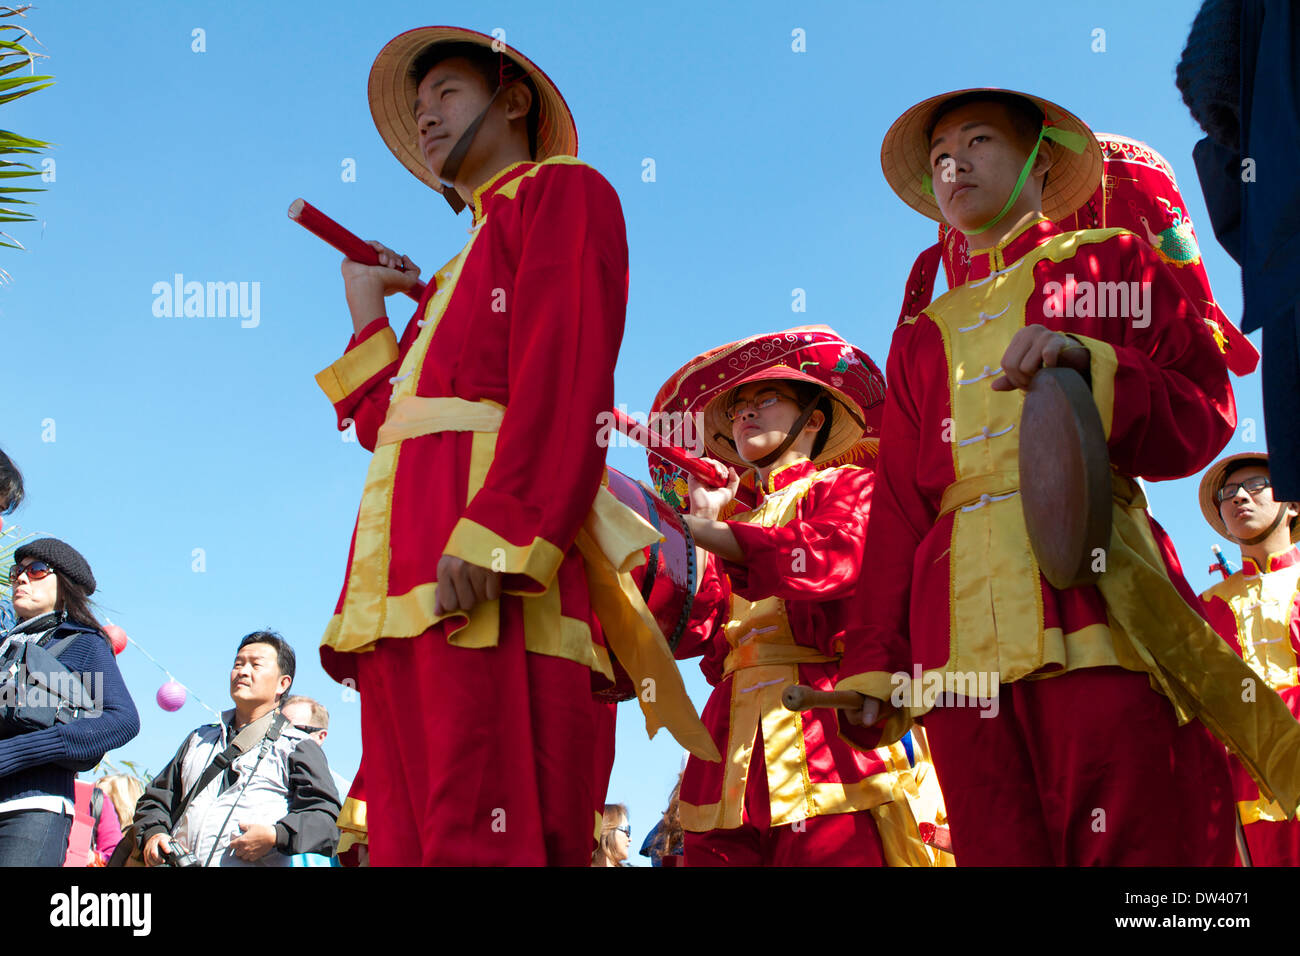 Vietnamese people in traditional costume and dress celebrate the lunar new year (Tet Festival) at Costa Mesa Southern California Stock Photo